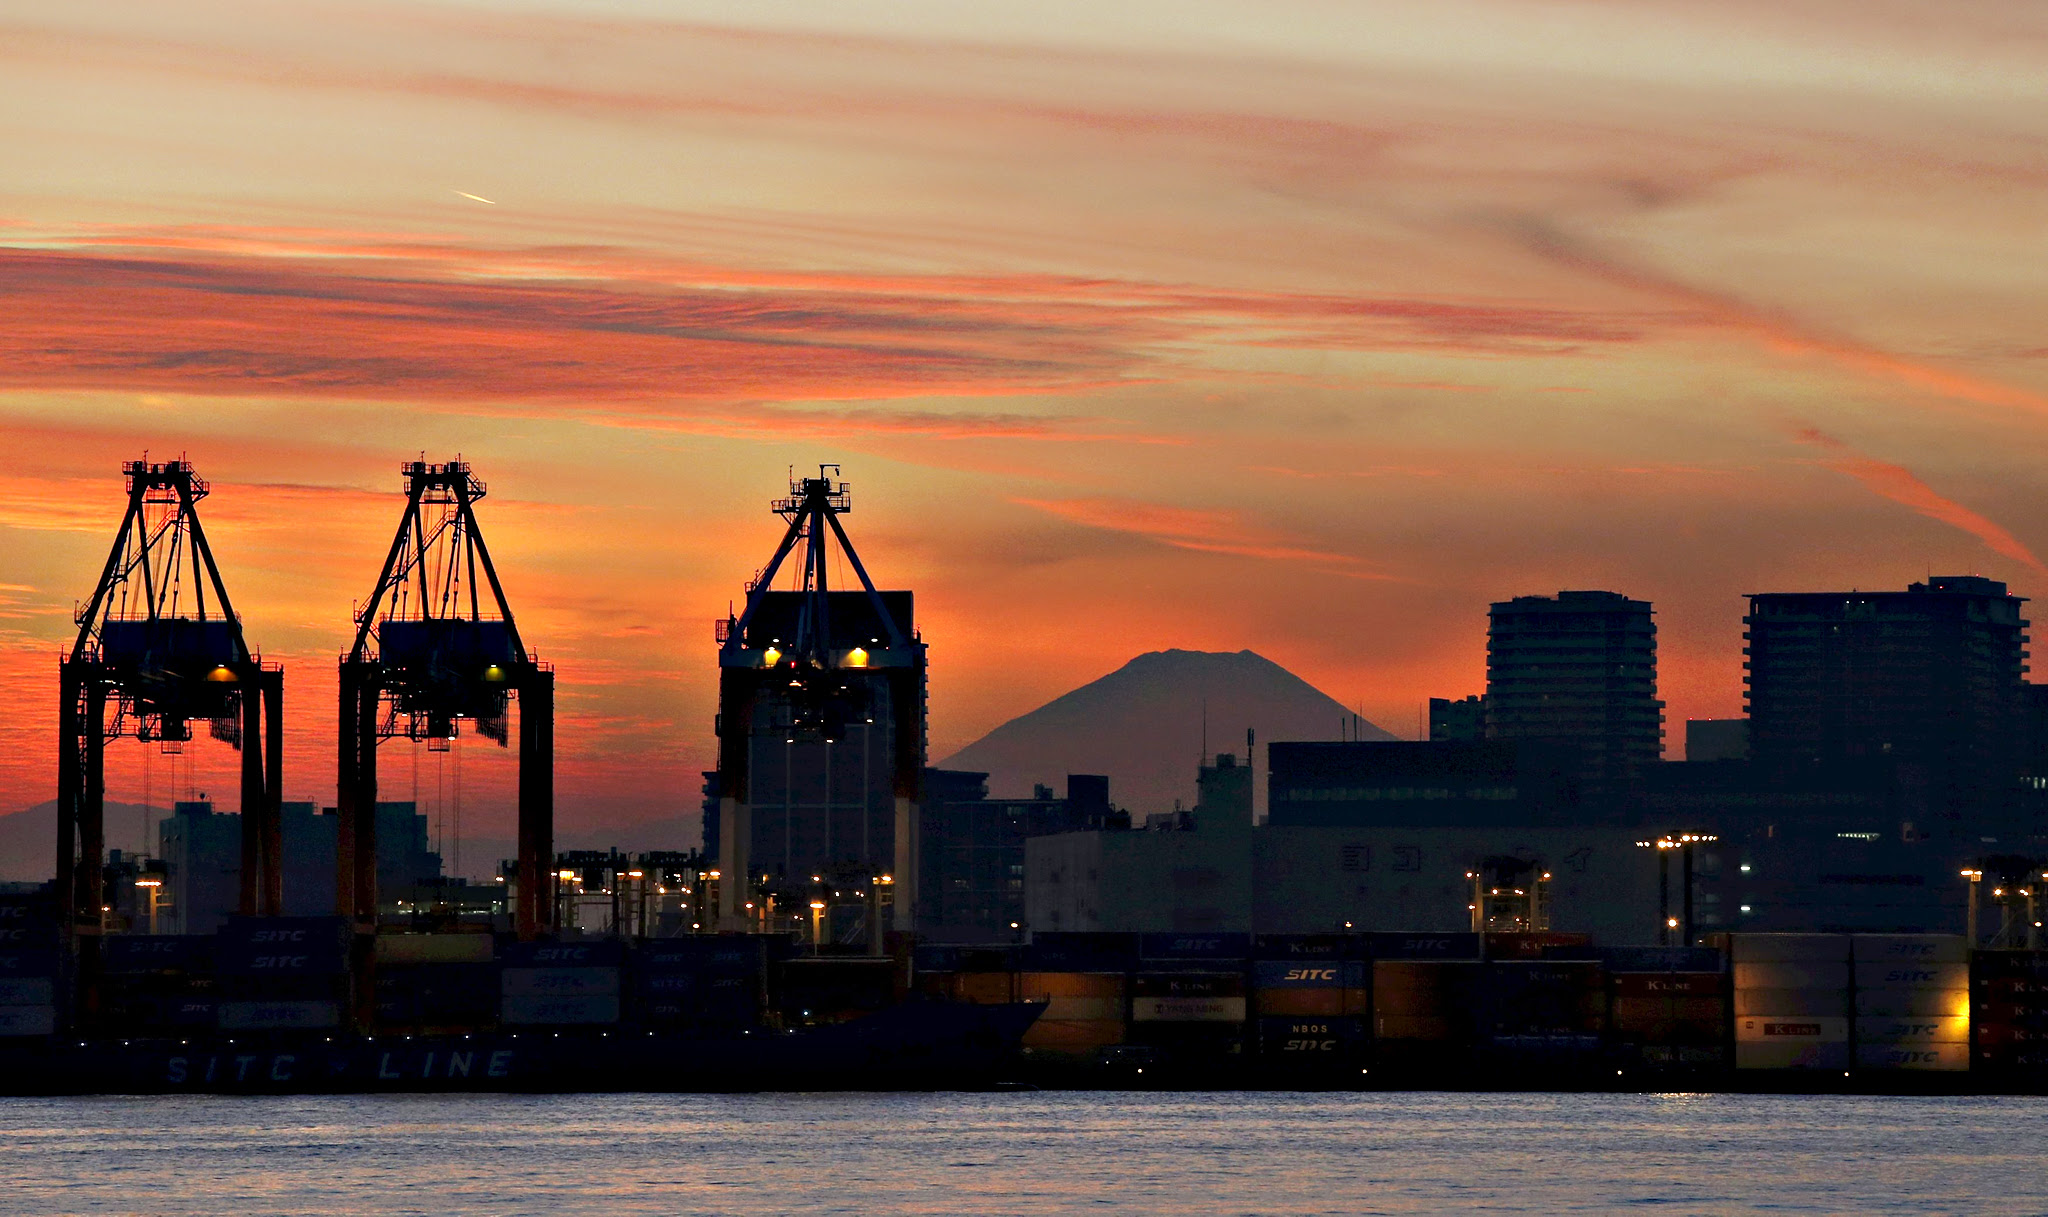 Mount Fuji is seen between cranes and buildings during sunset at a port in Tokyo, Japan, on Wednesday. Japan's core machinery orders unexpectedly jumped in October by the most since March 2014